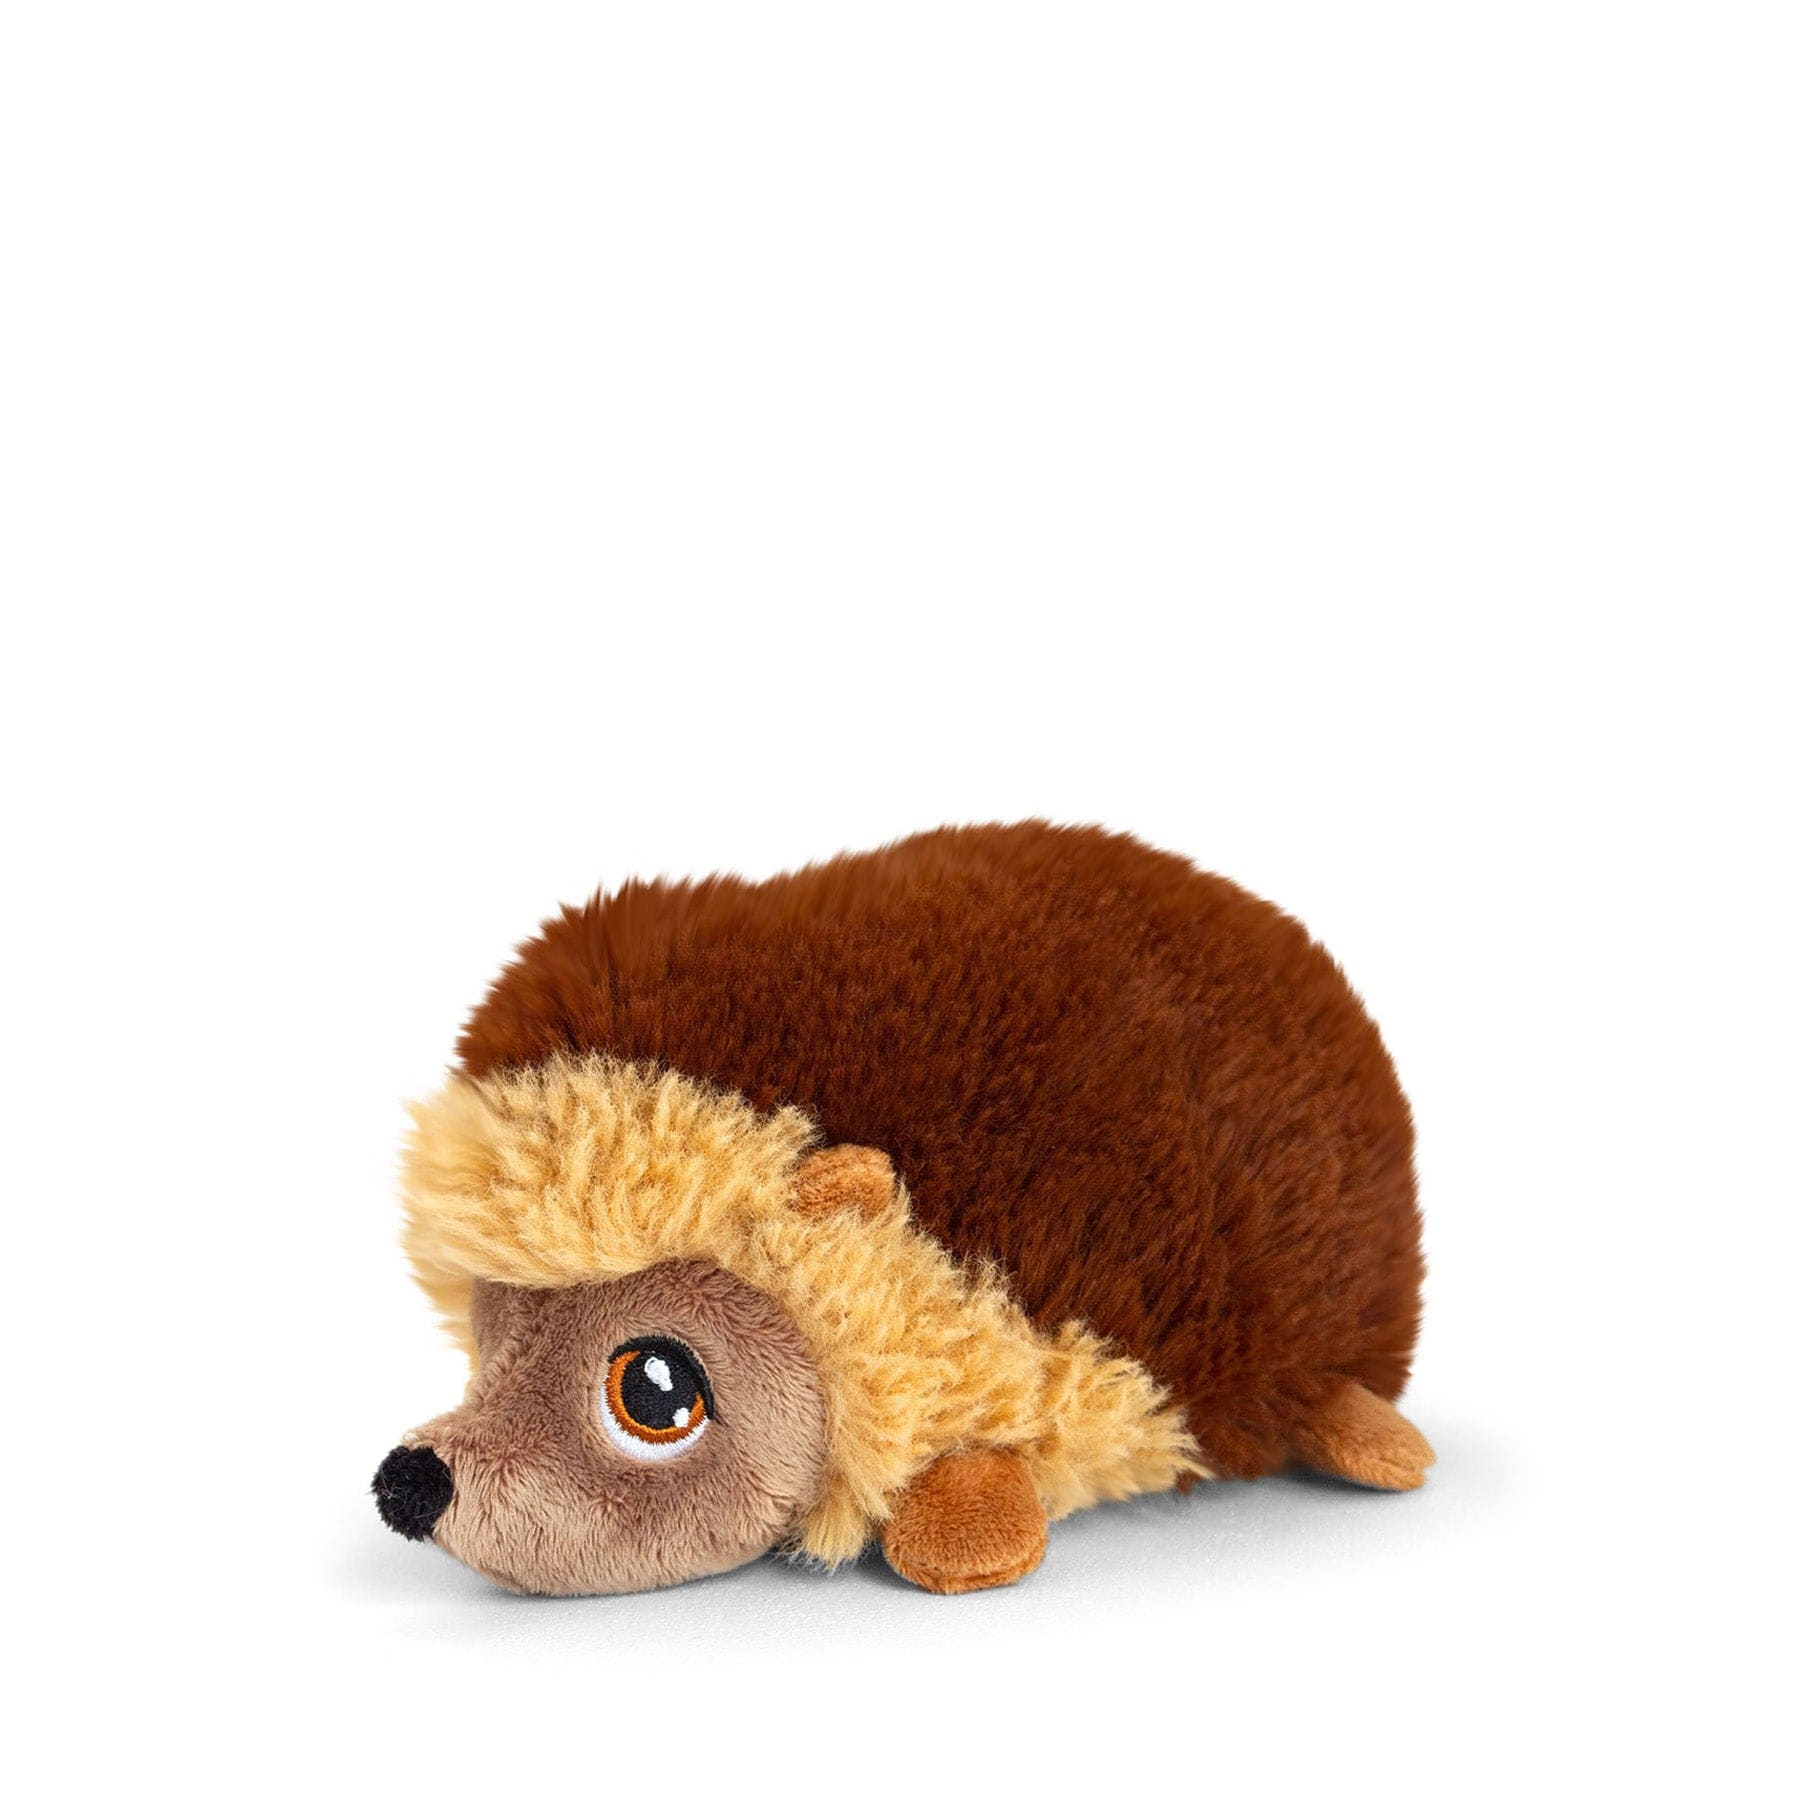 Brown plush hedgehog toy isolated on white background